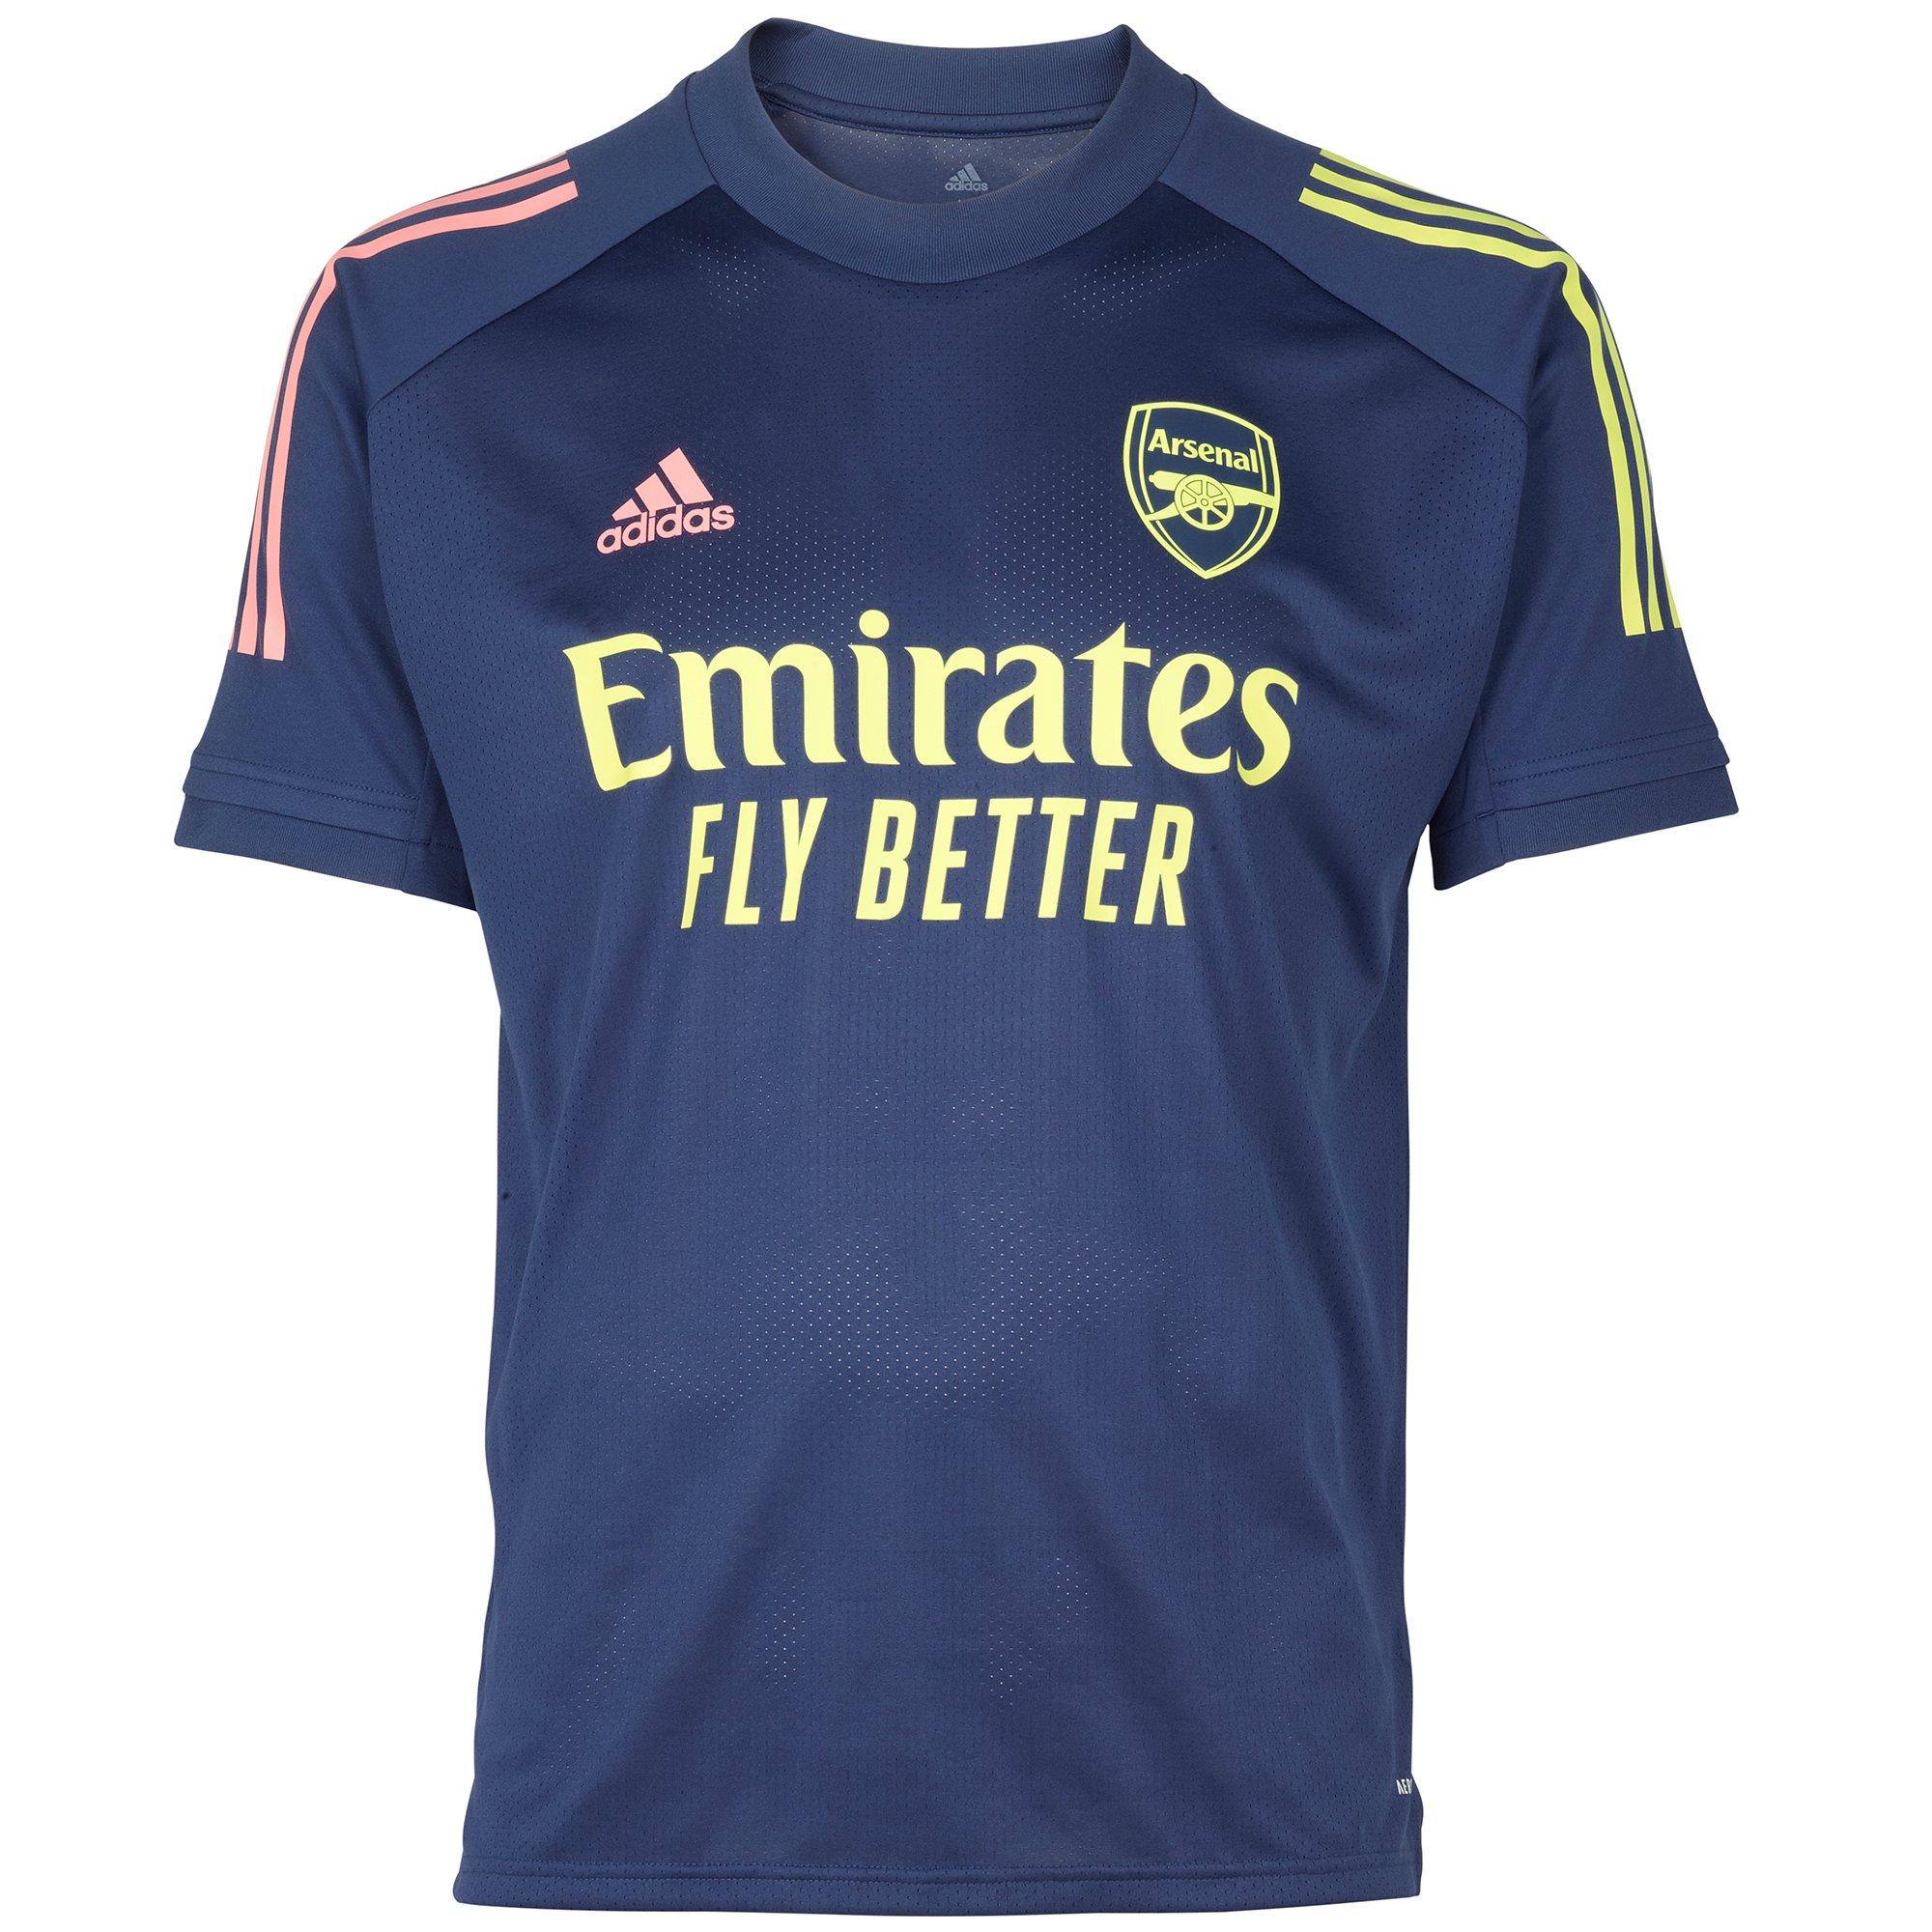 The Arsenal 20/21 Kits | Official 